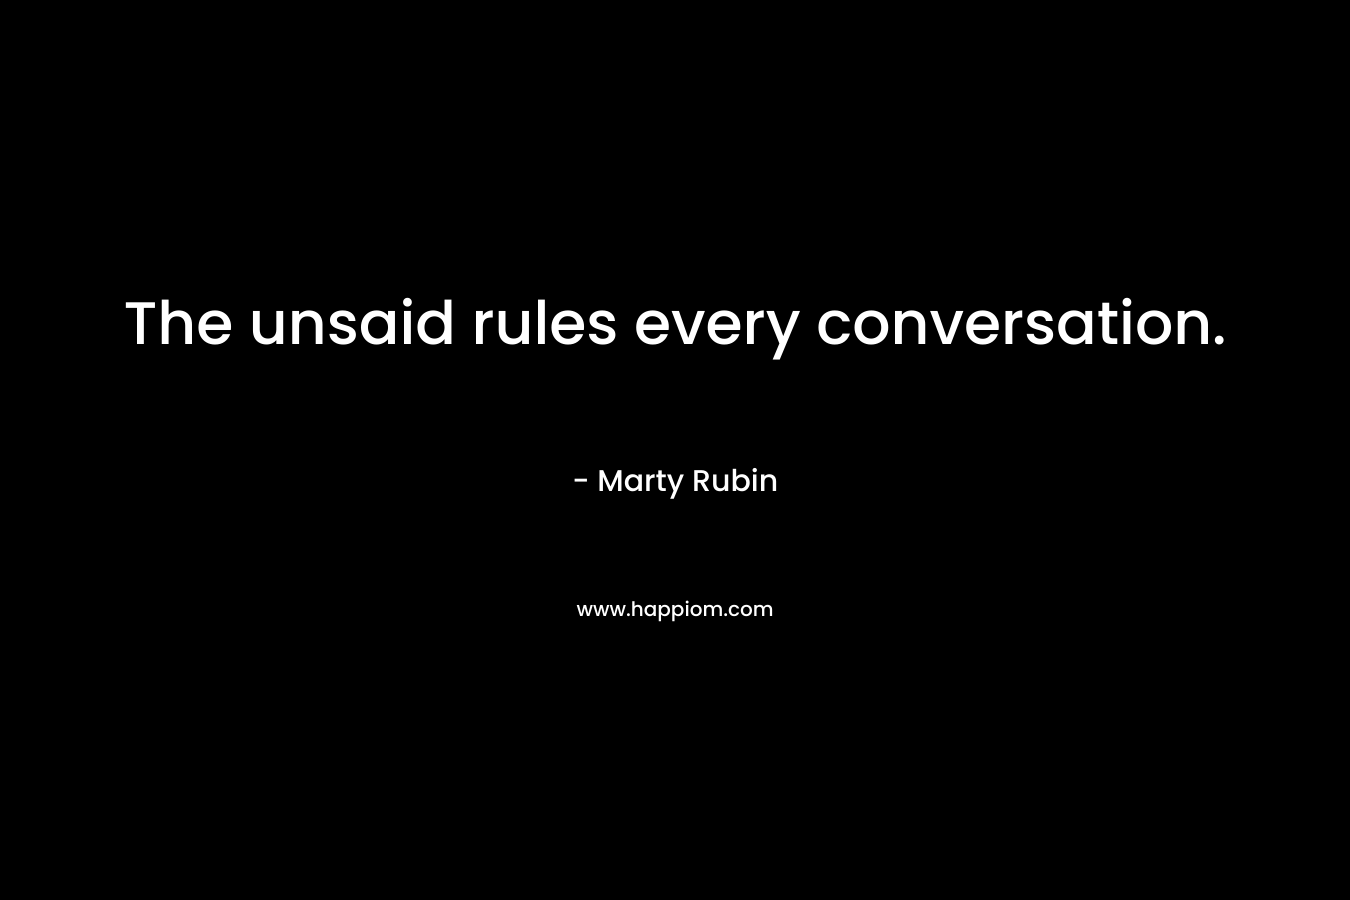 The unsaid rules every conversation. – Marty Rubin